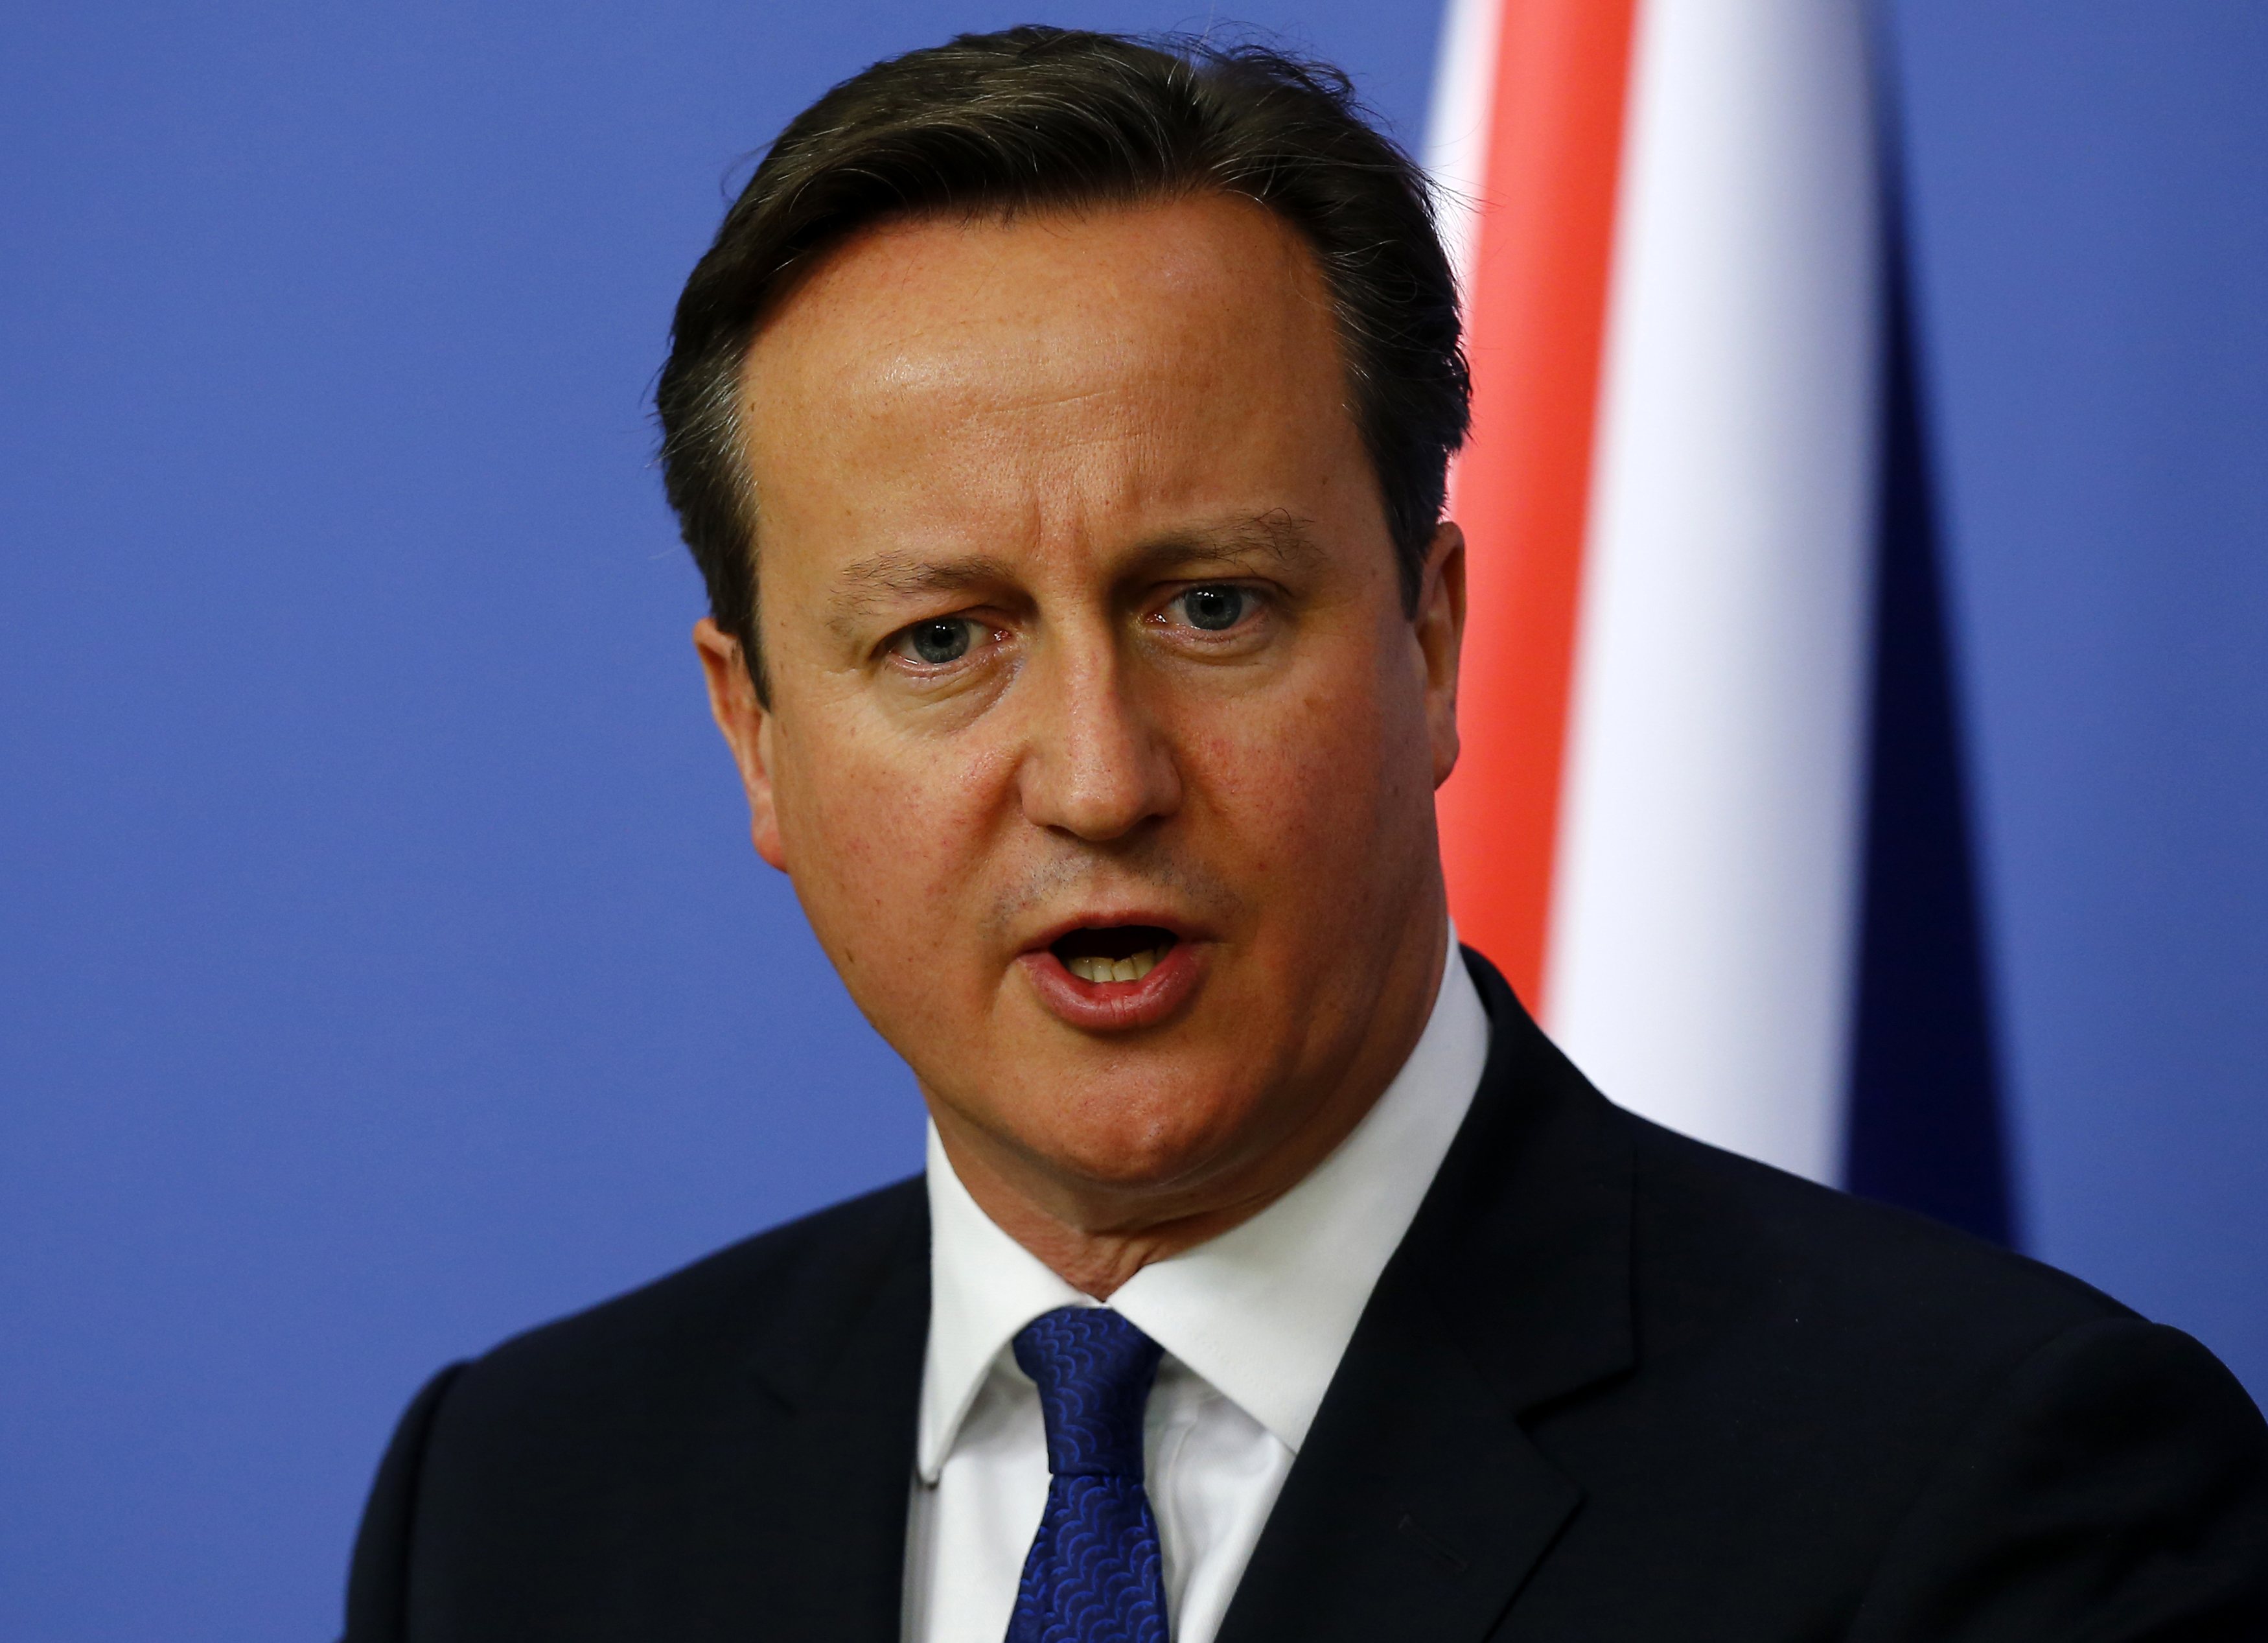 Cameron Wants End to Northern Ireland Political Deadlock this Week